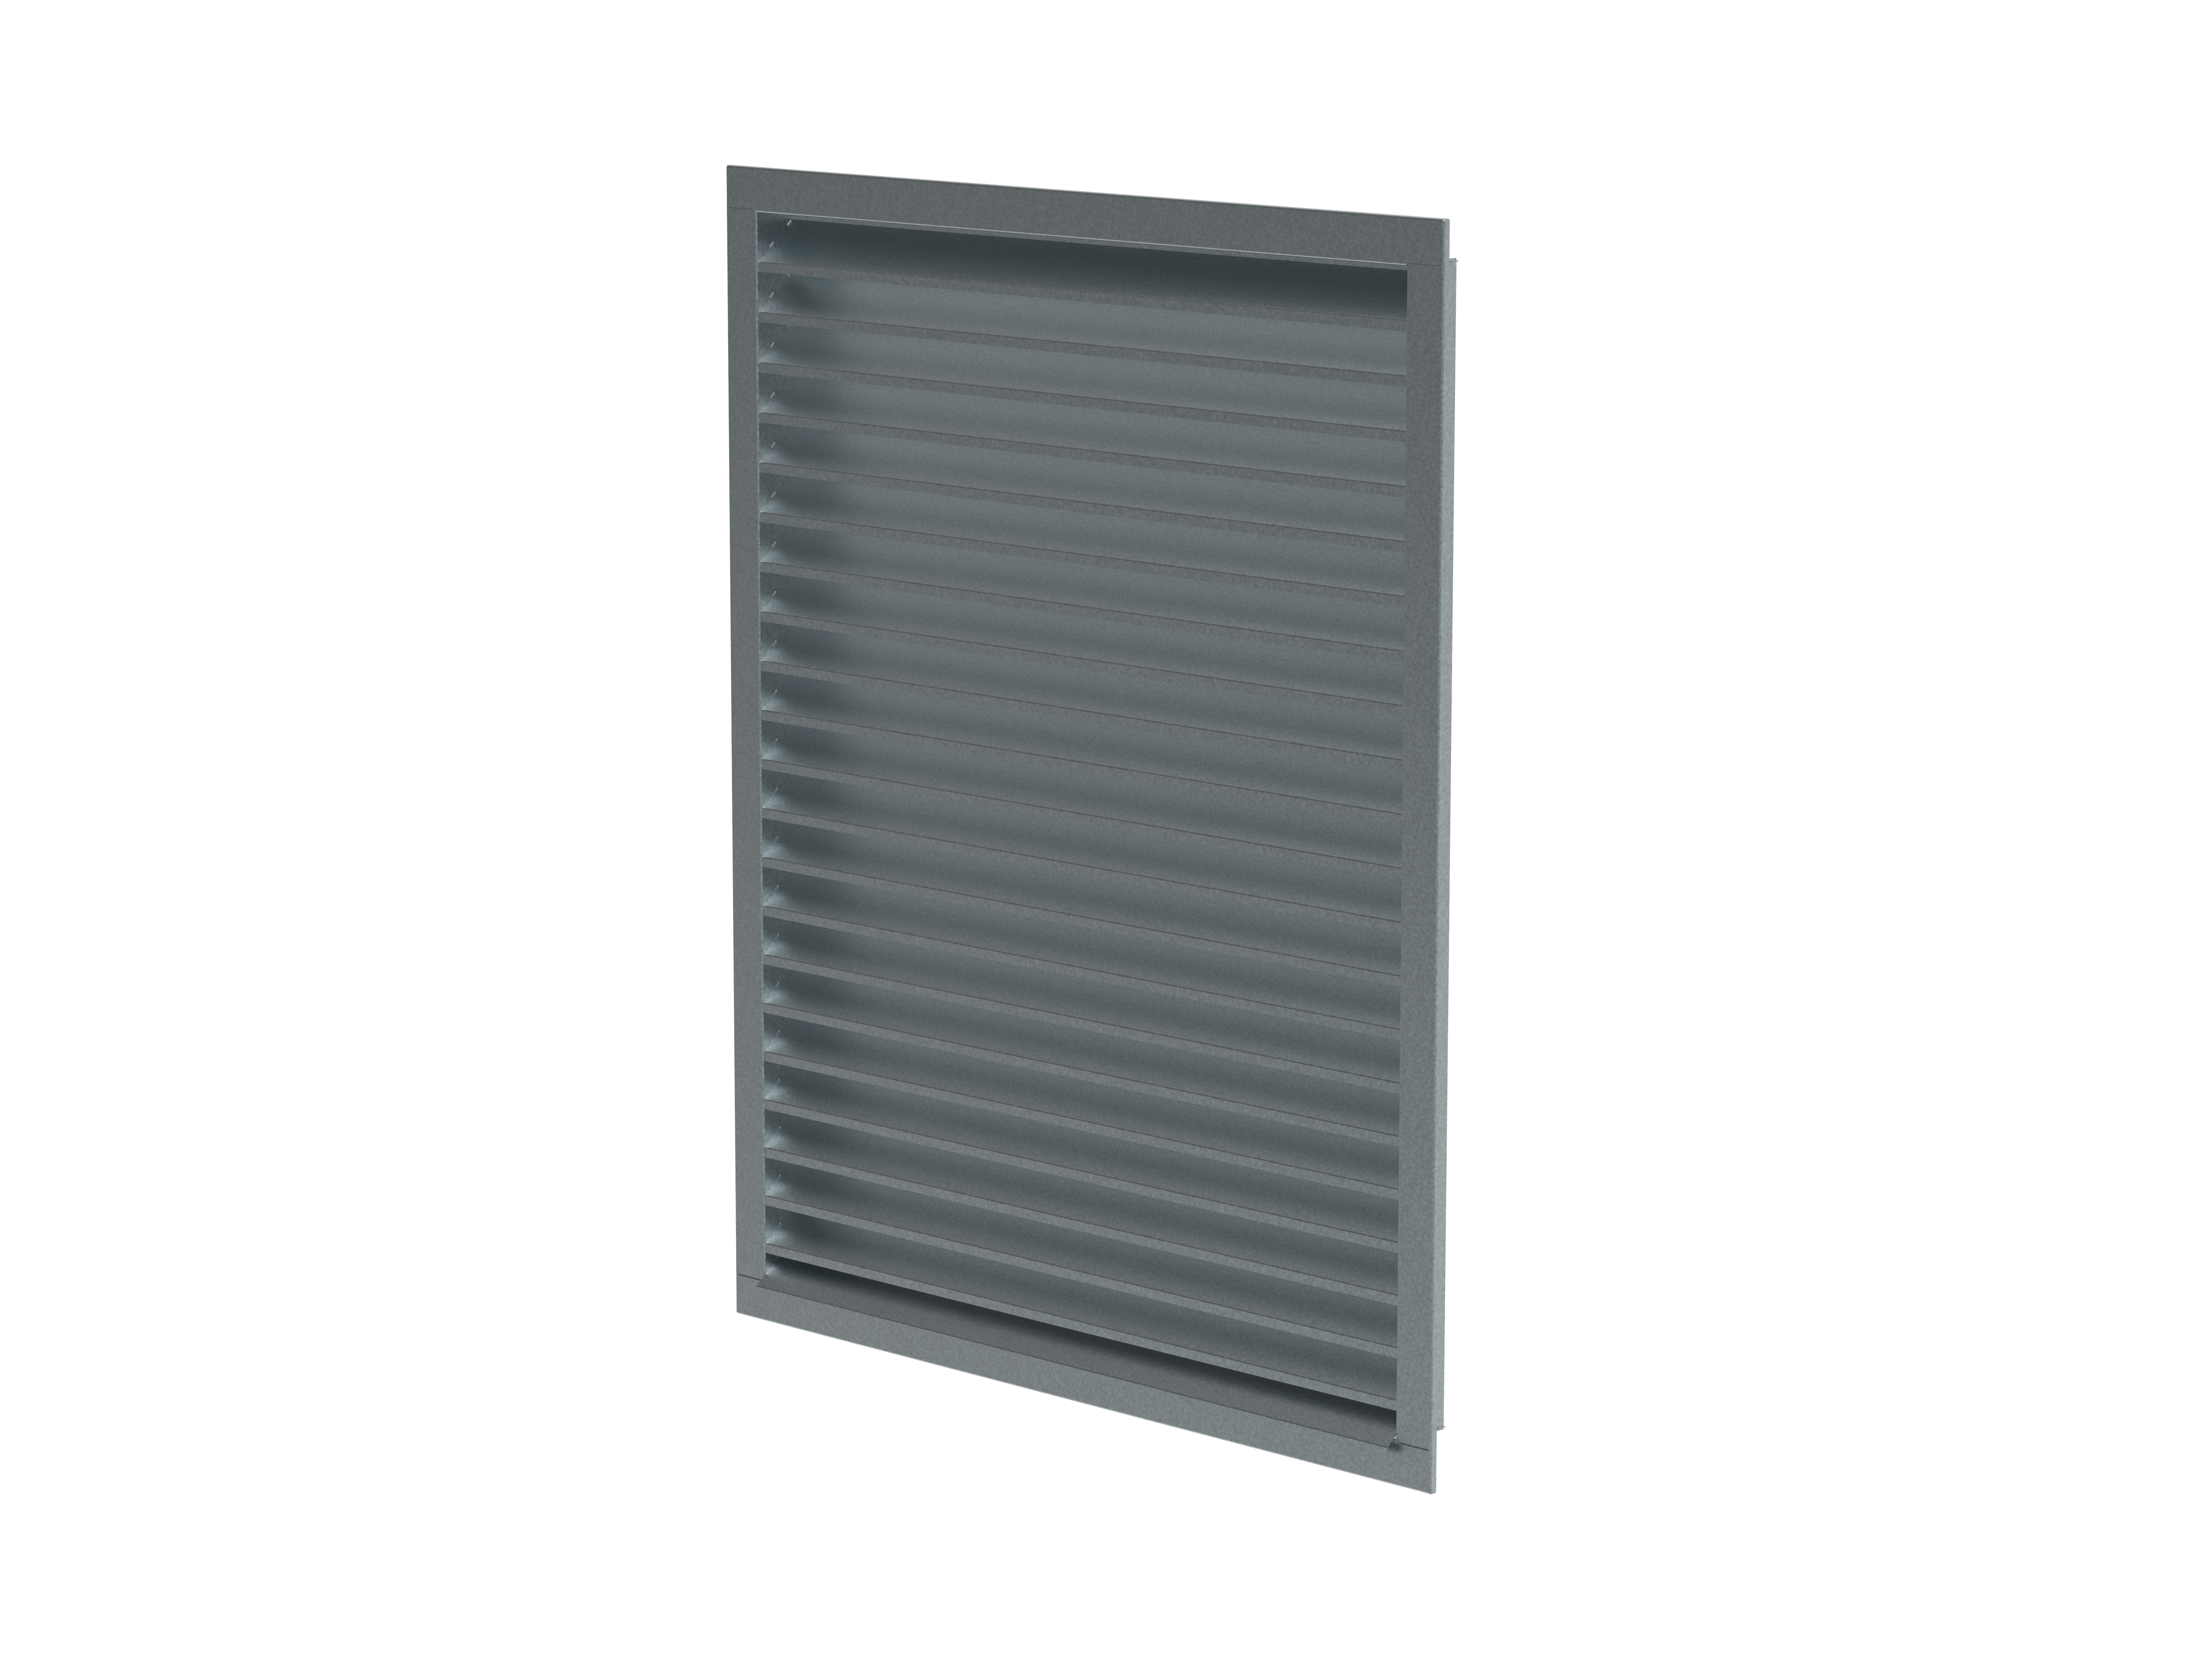 PZZN - Louvres - Air Distribution Products - Products - Systemair